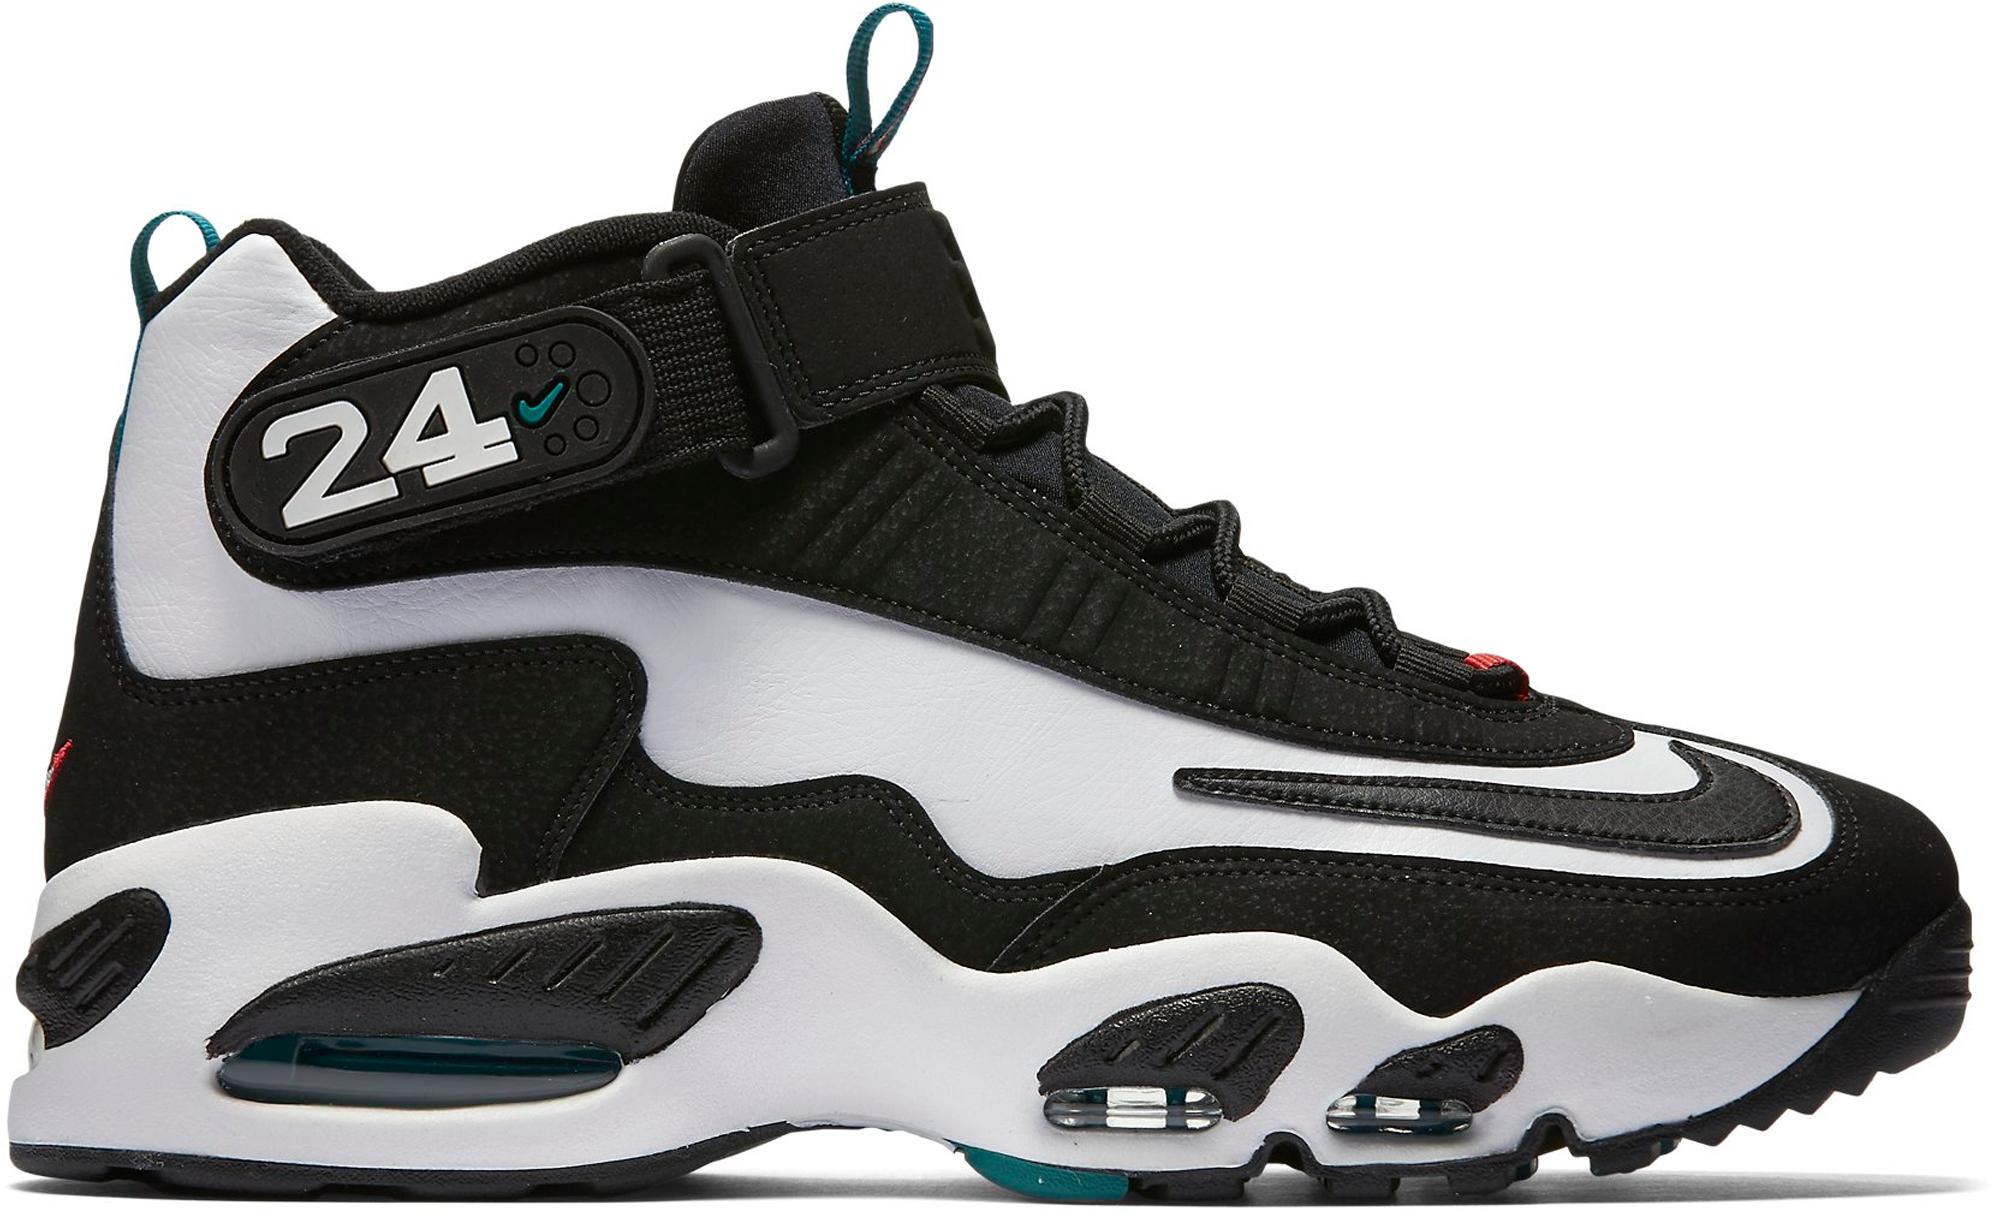 Nike Air Griffey Max 1 Shoes - Size 13 in White/Black (Black) for Men